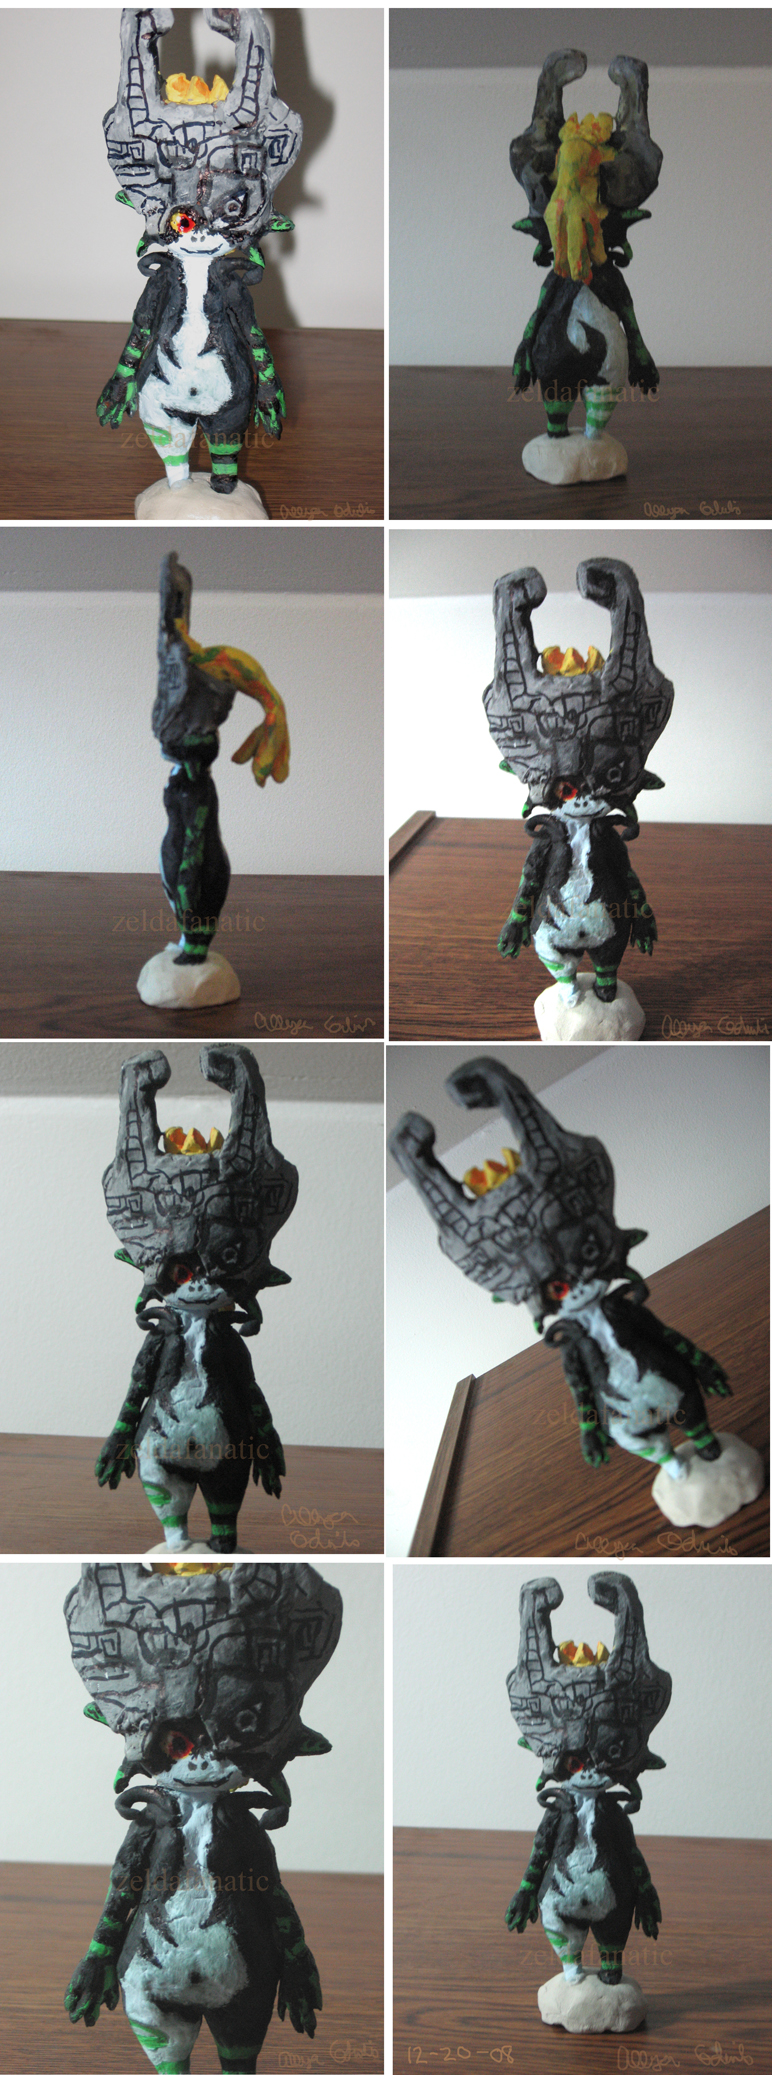 Small Midna Sculpture by Rinkuchan